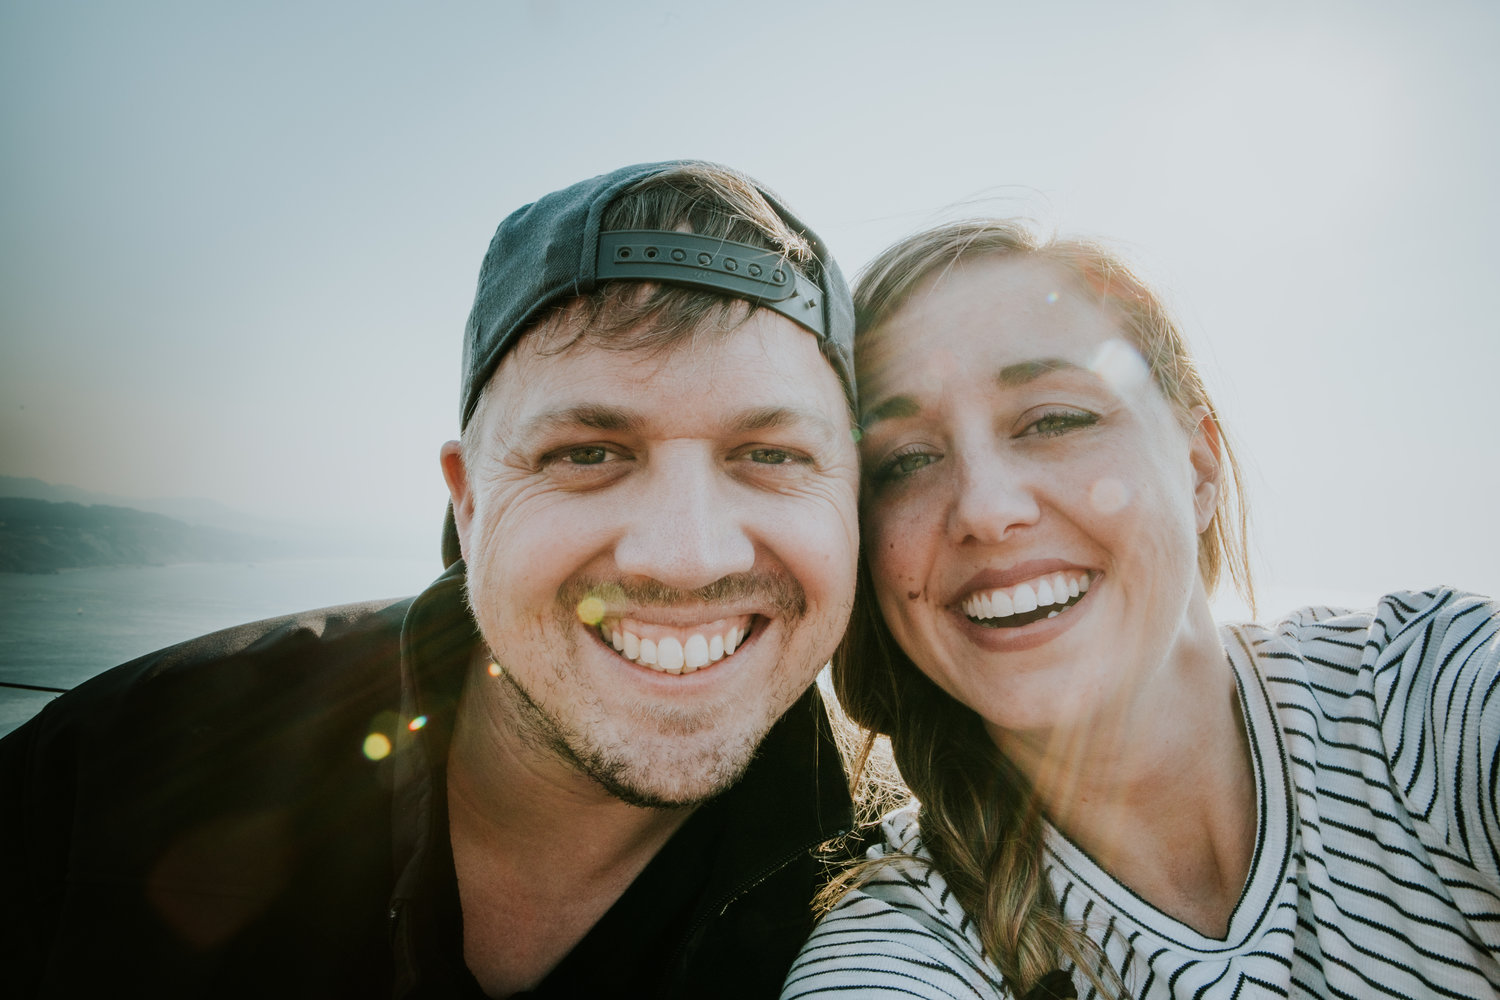 selfie of two people in san francisco for a bizarre wedding photography podcast